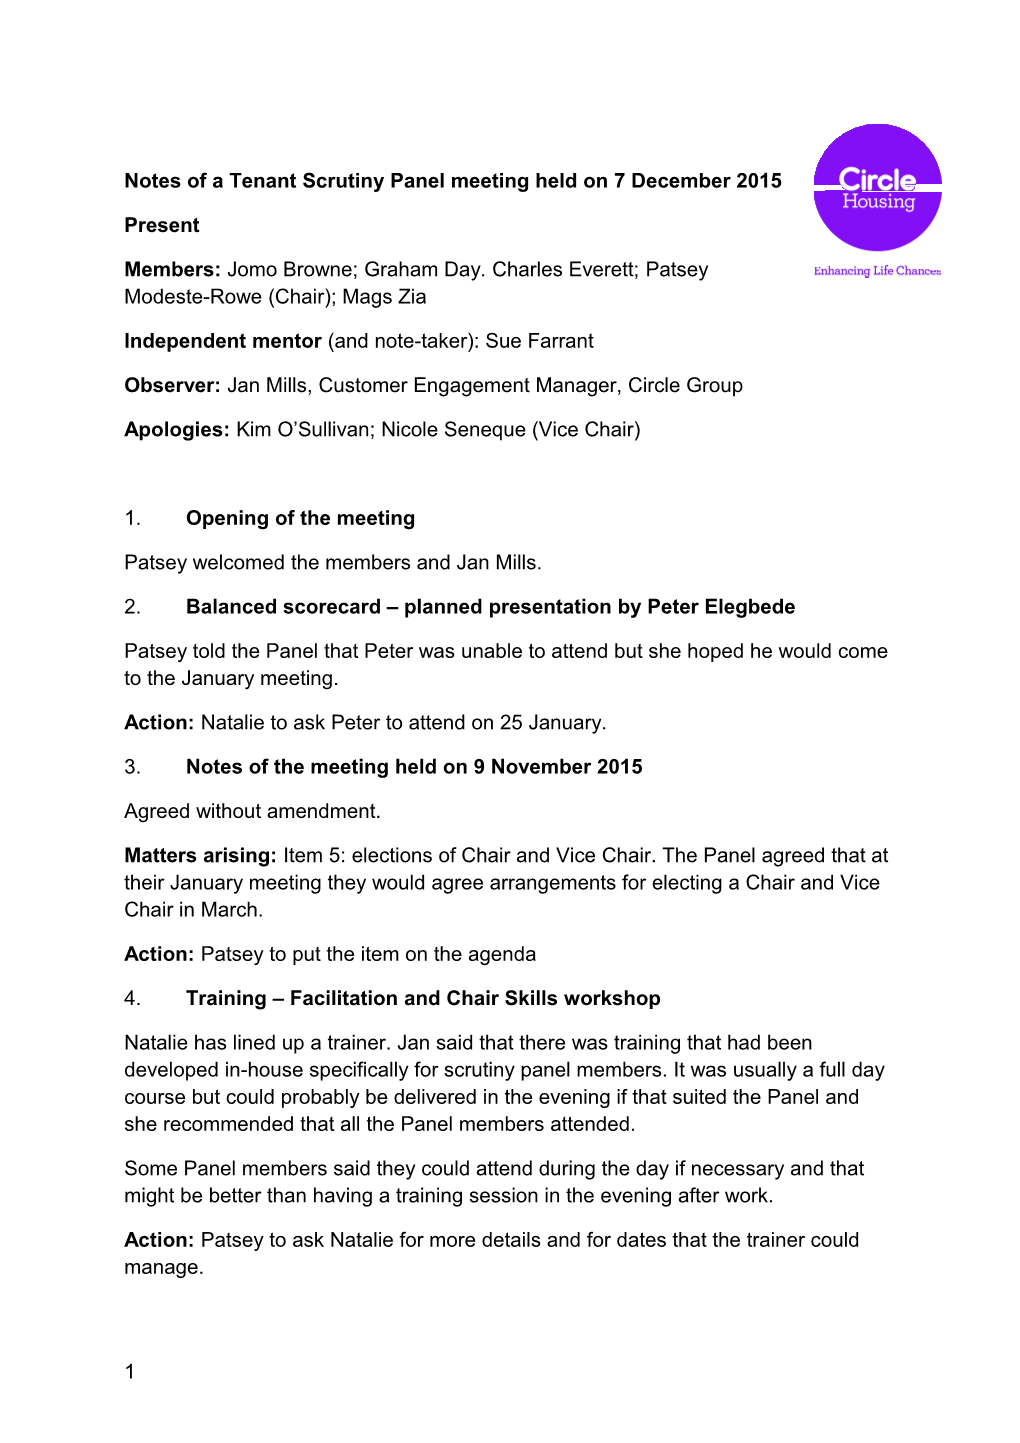 Notes of a Tenant Scrutiny Panel Meeting Held on 7December2015